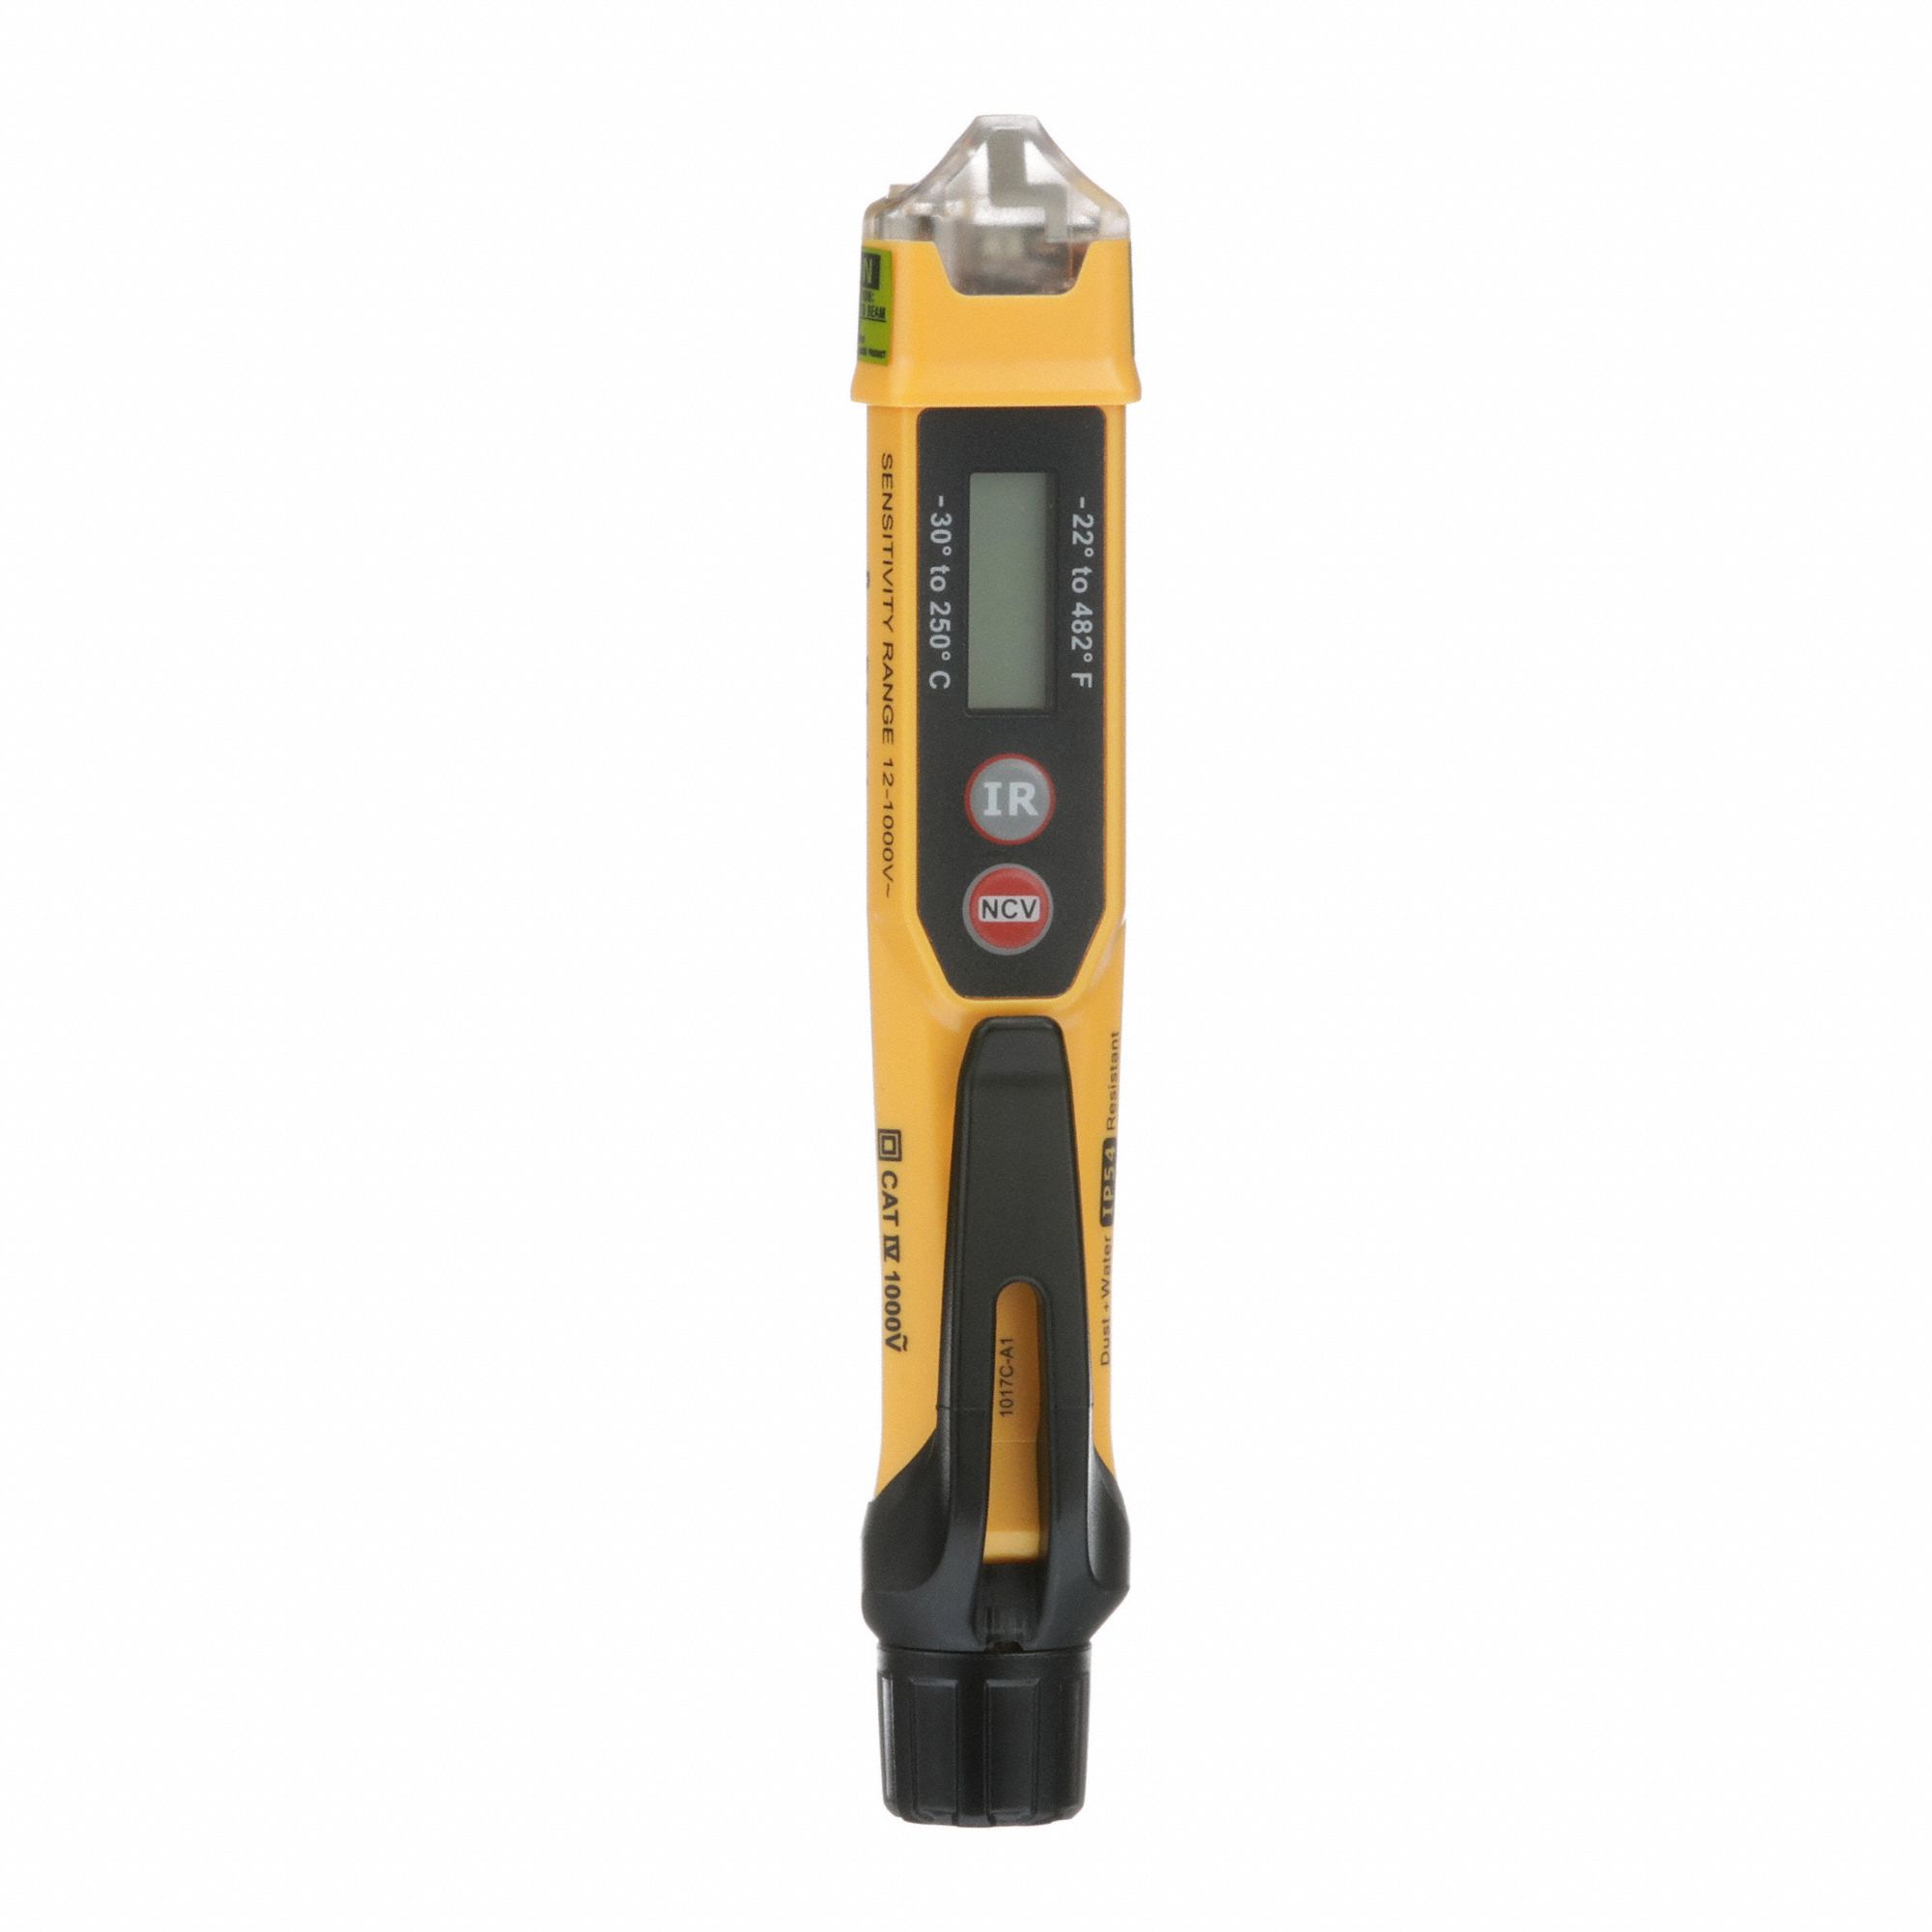 NCVT-4IR Klein Tools, Voltage Tester, Non Contact, IR Thermometer